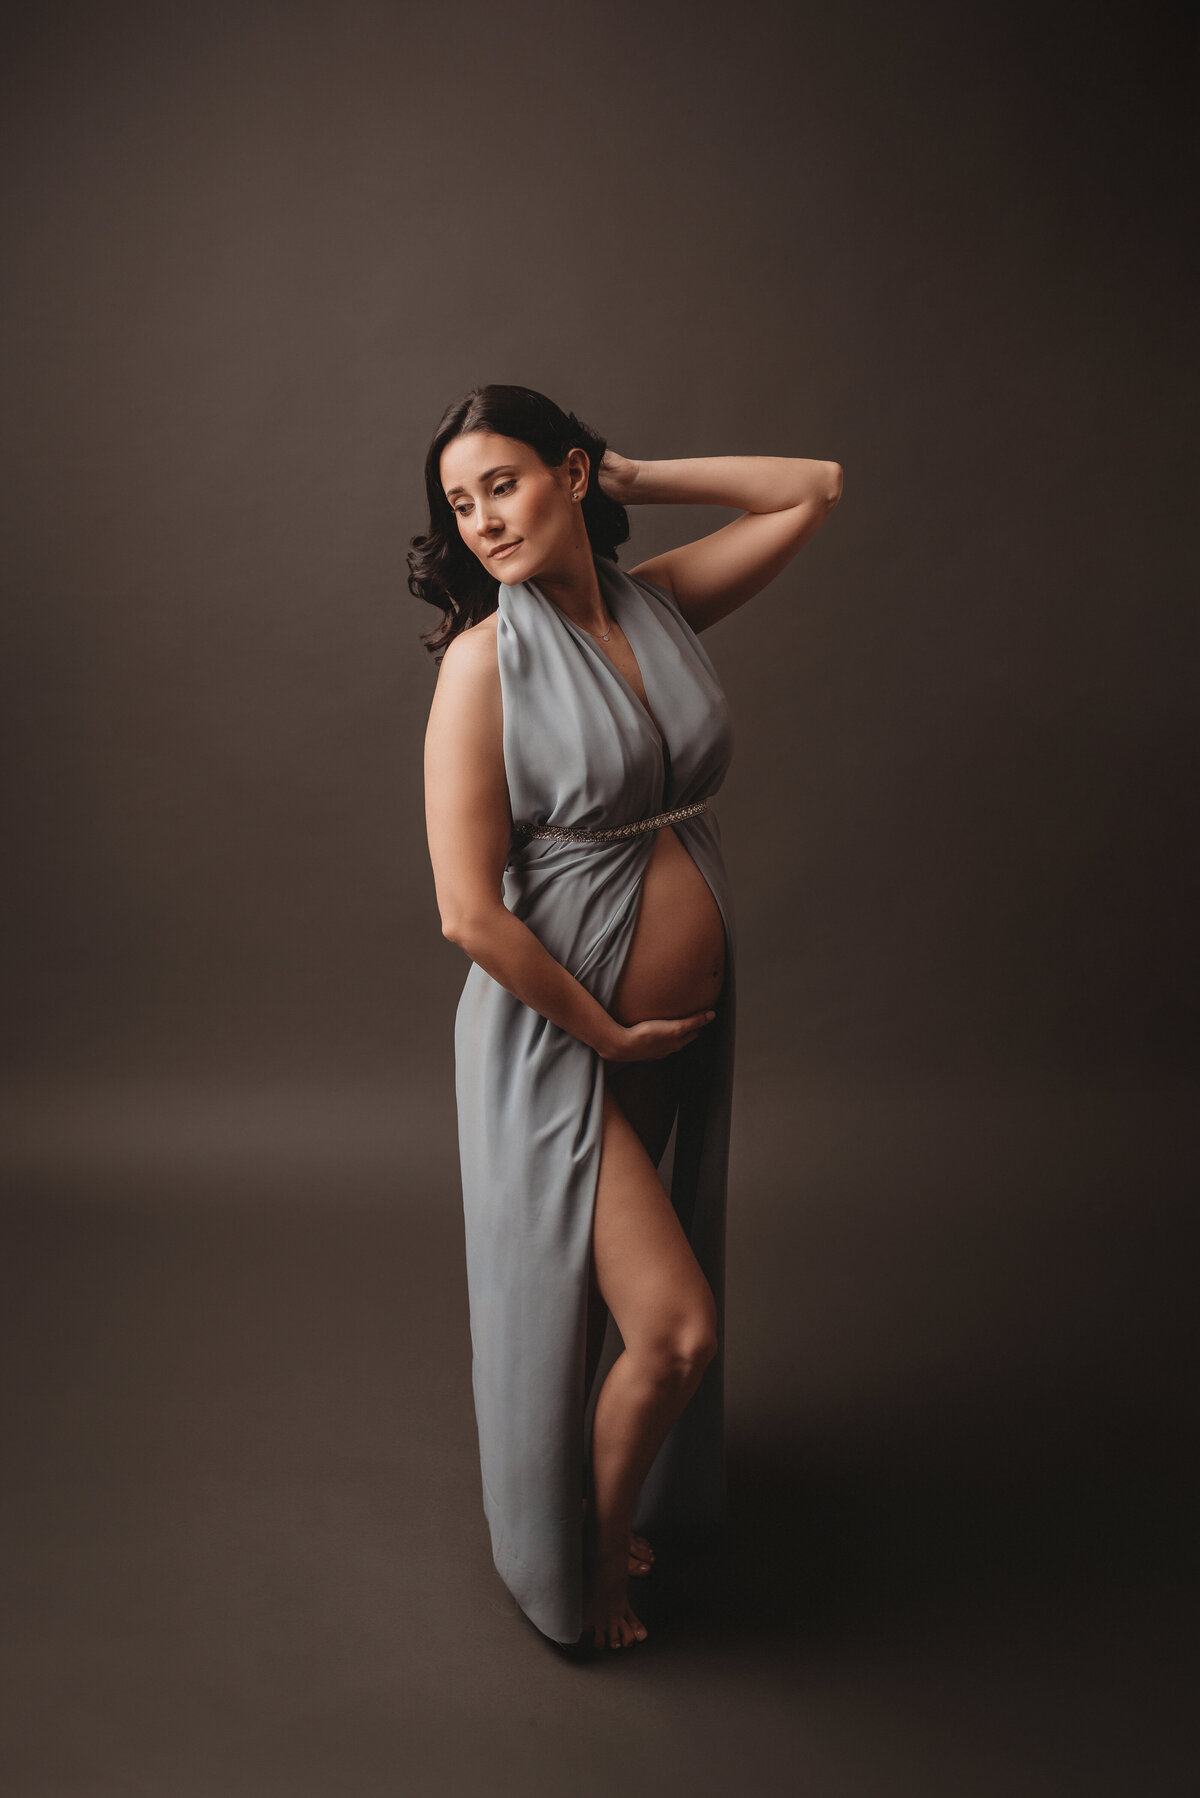 Maternity picture of goddess looking brown haired woman in light blue chiffon open tummy dress. She is holding her baby bump with right hand and other hand is tucked behind her hair while she looks over her right shoulder